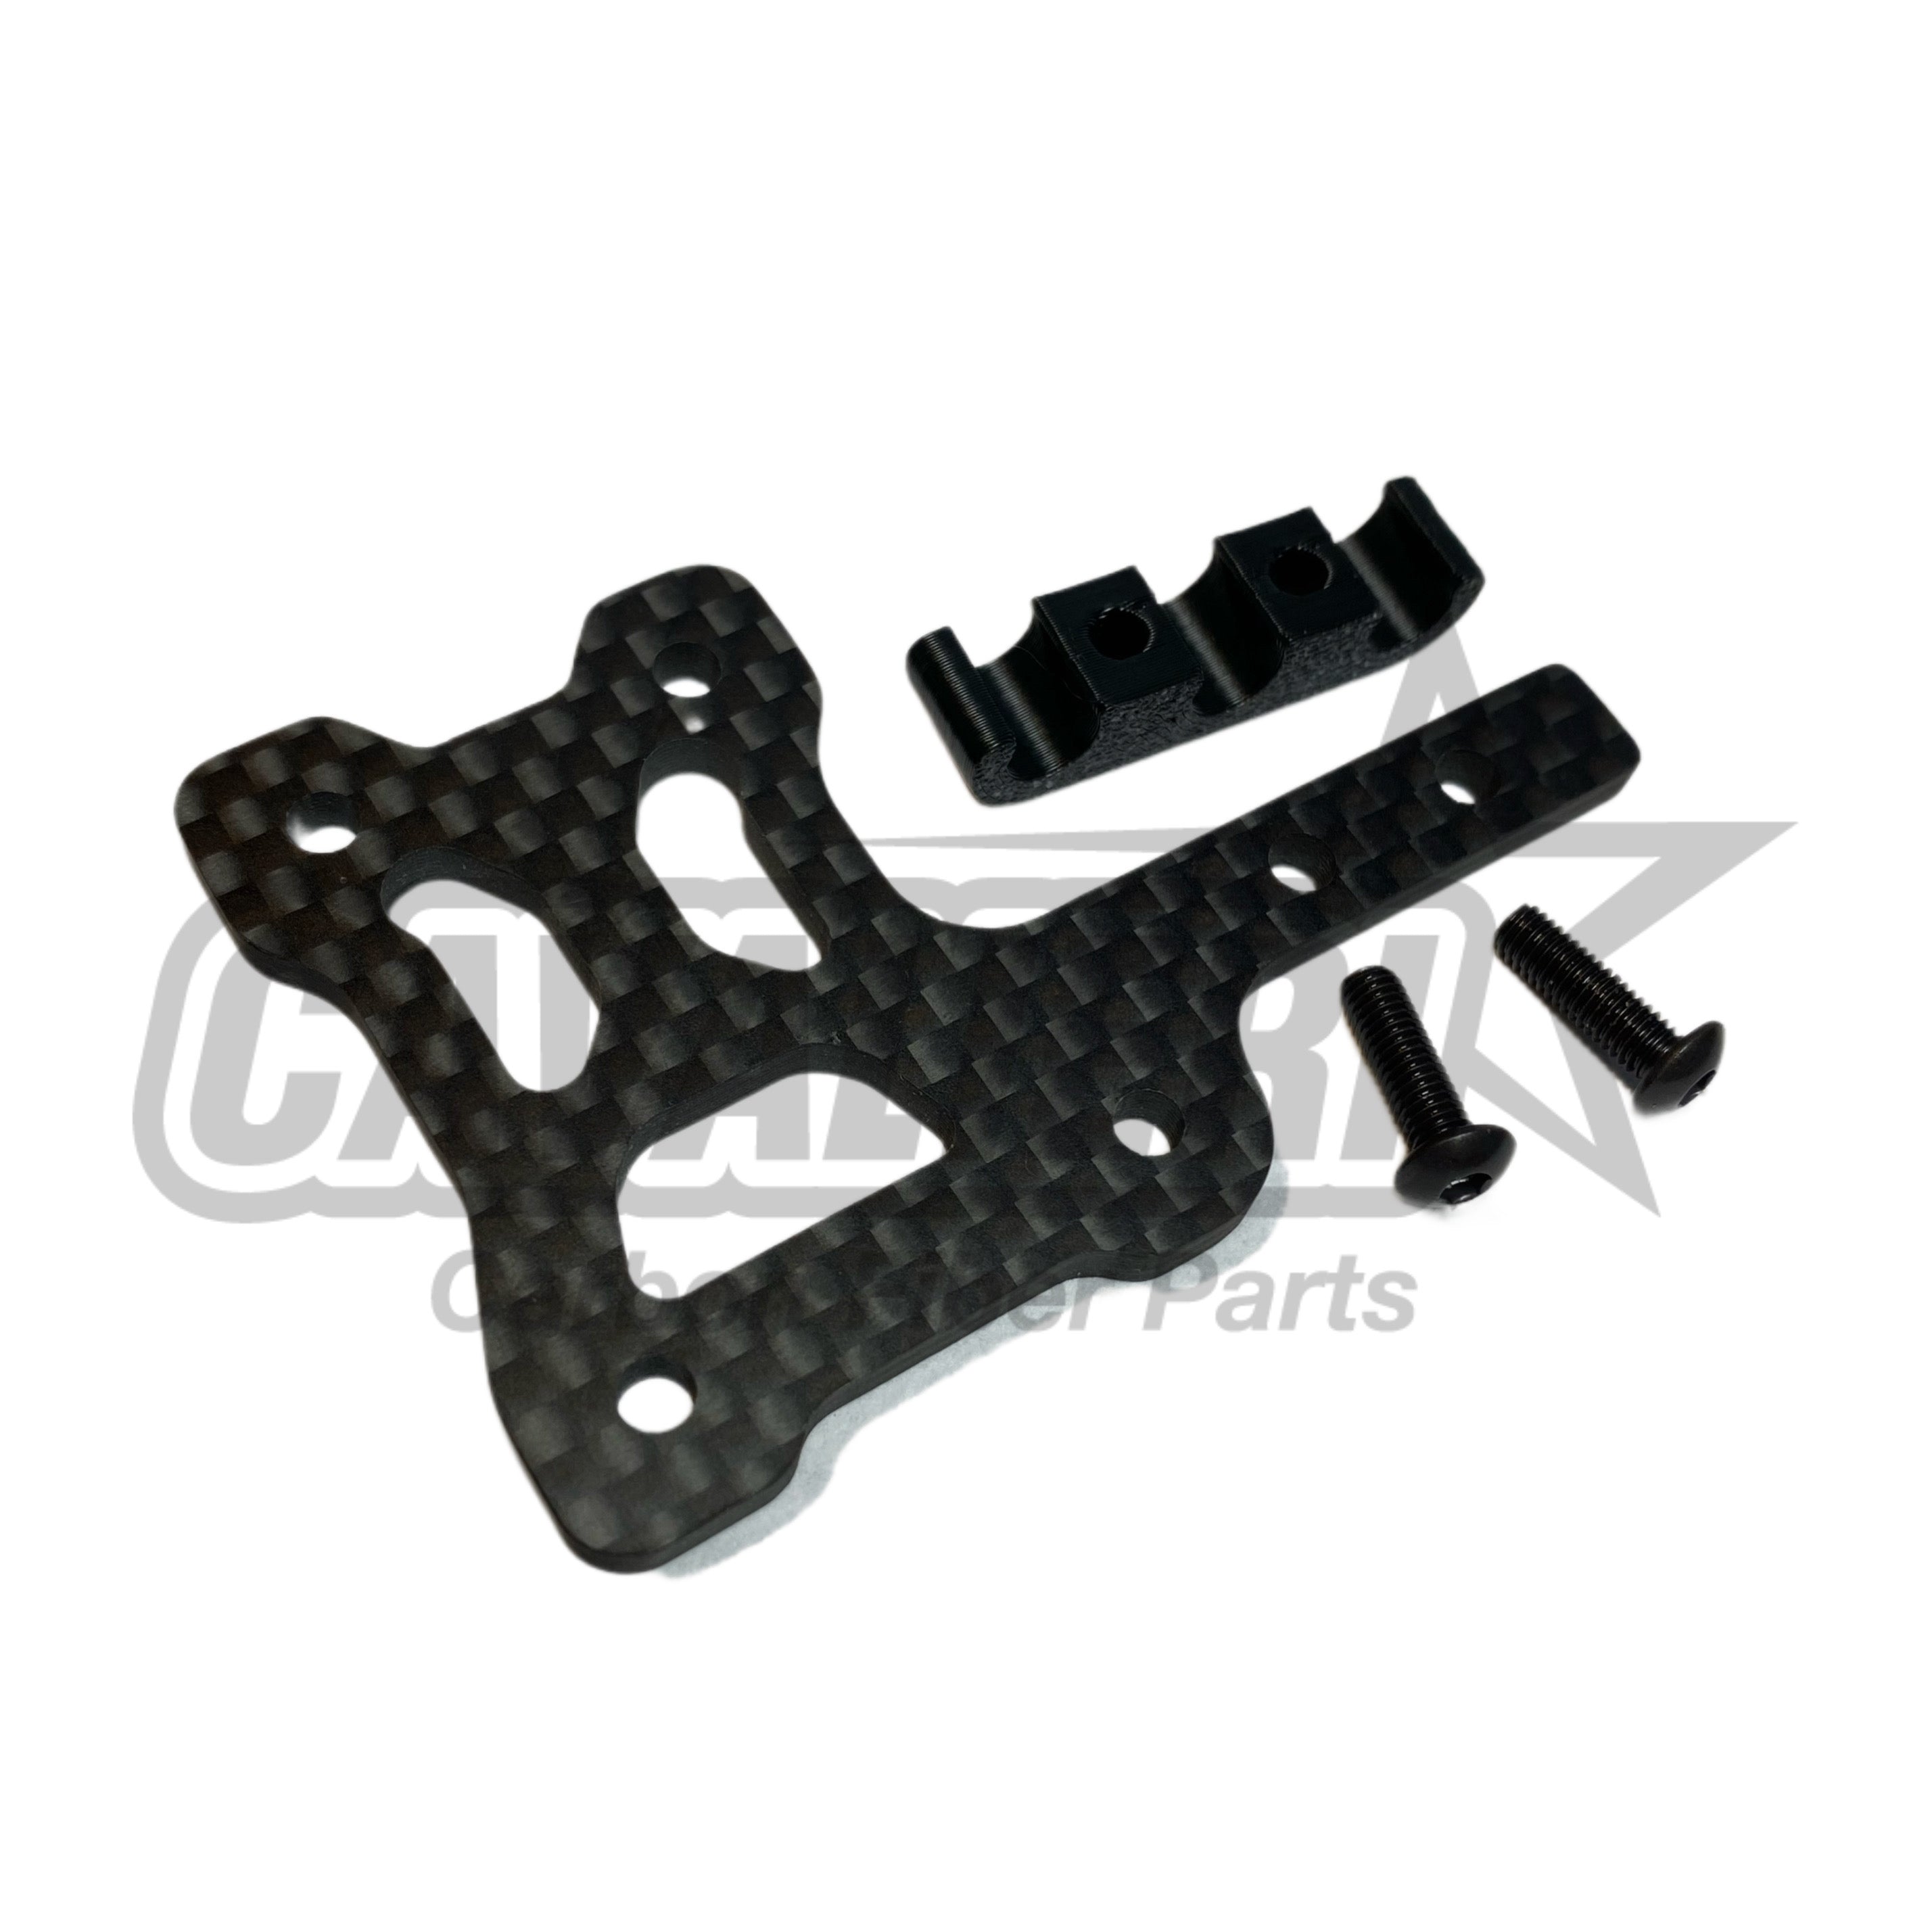 Kyosho MP10E Center Diff Plate with Cable Holder